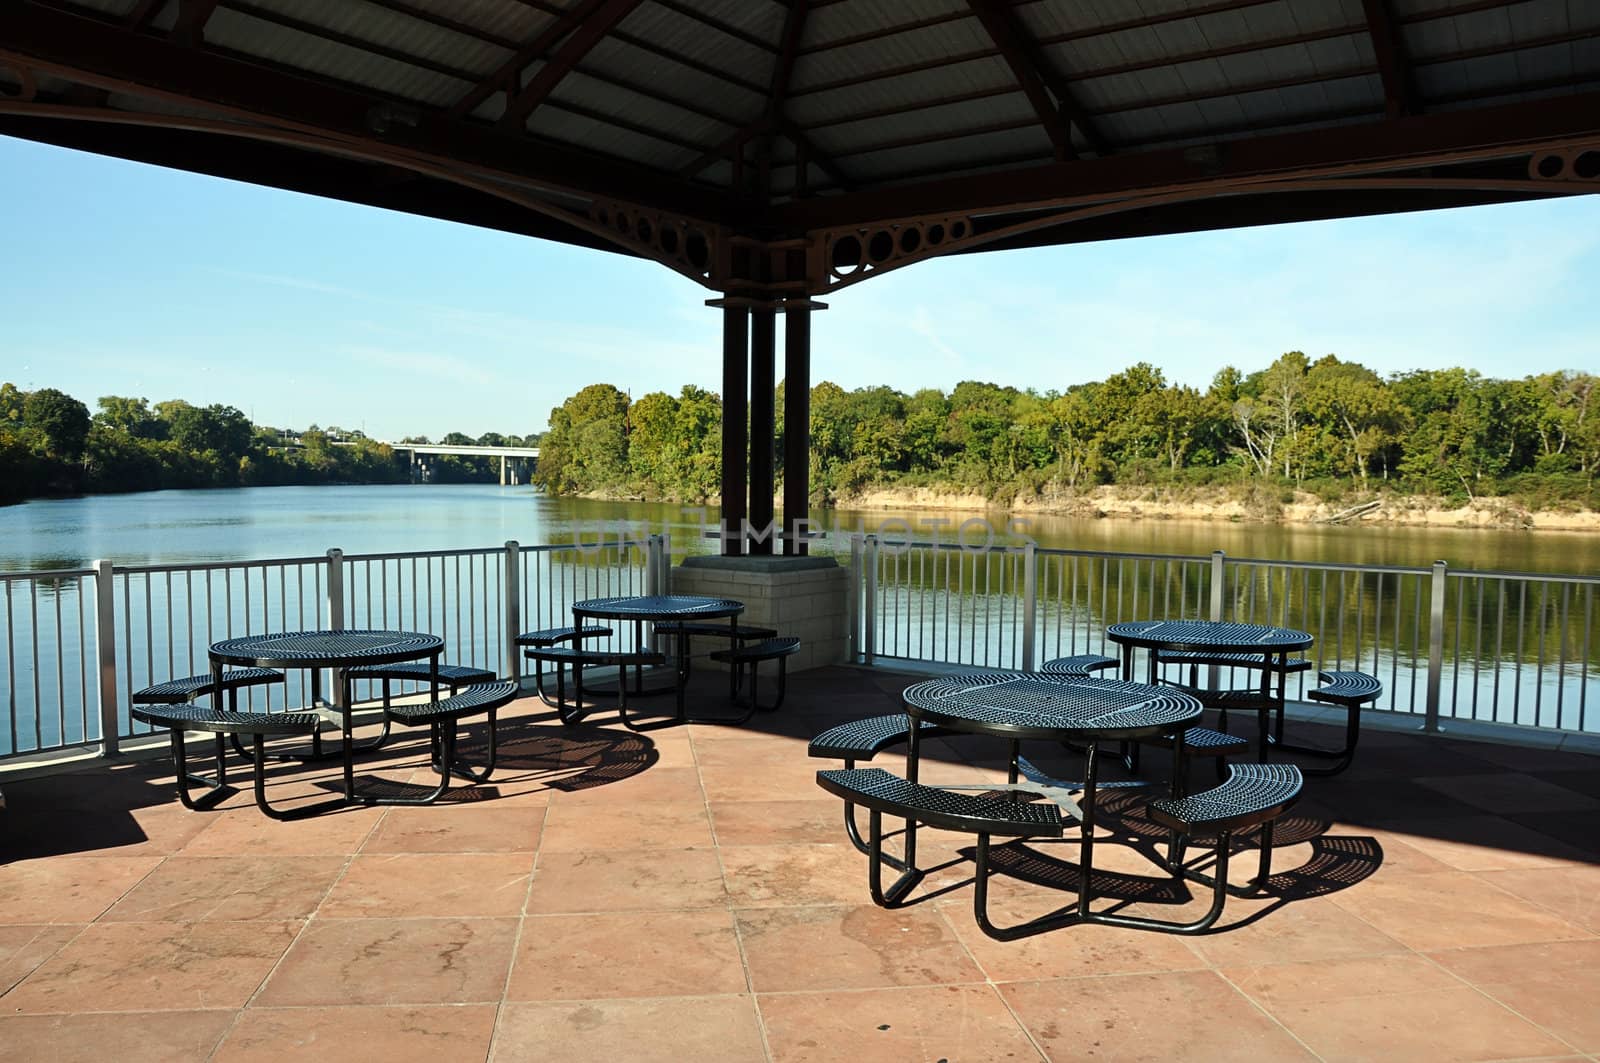 Picnic Tables on Pavilion Overlooking River by dehooks